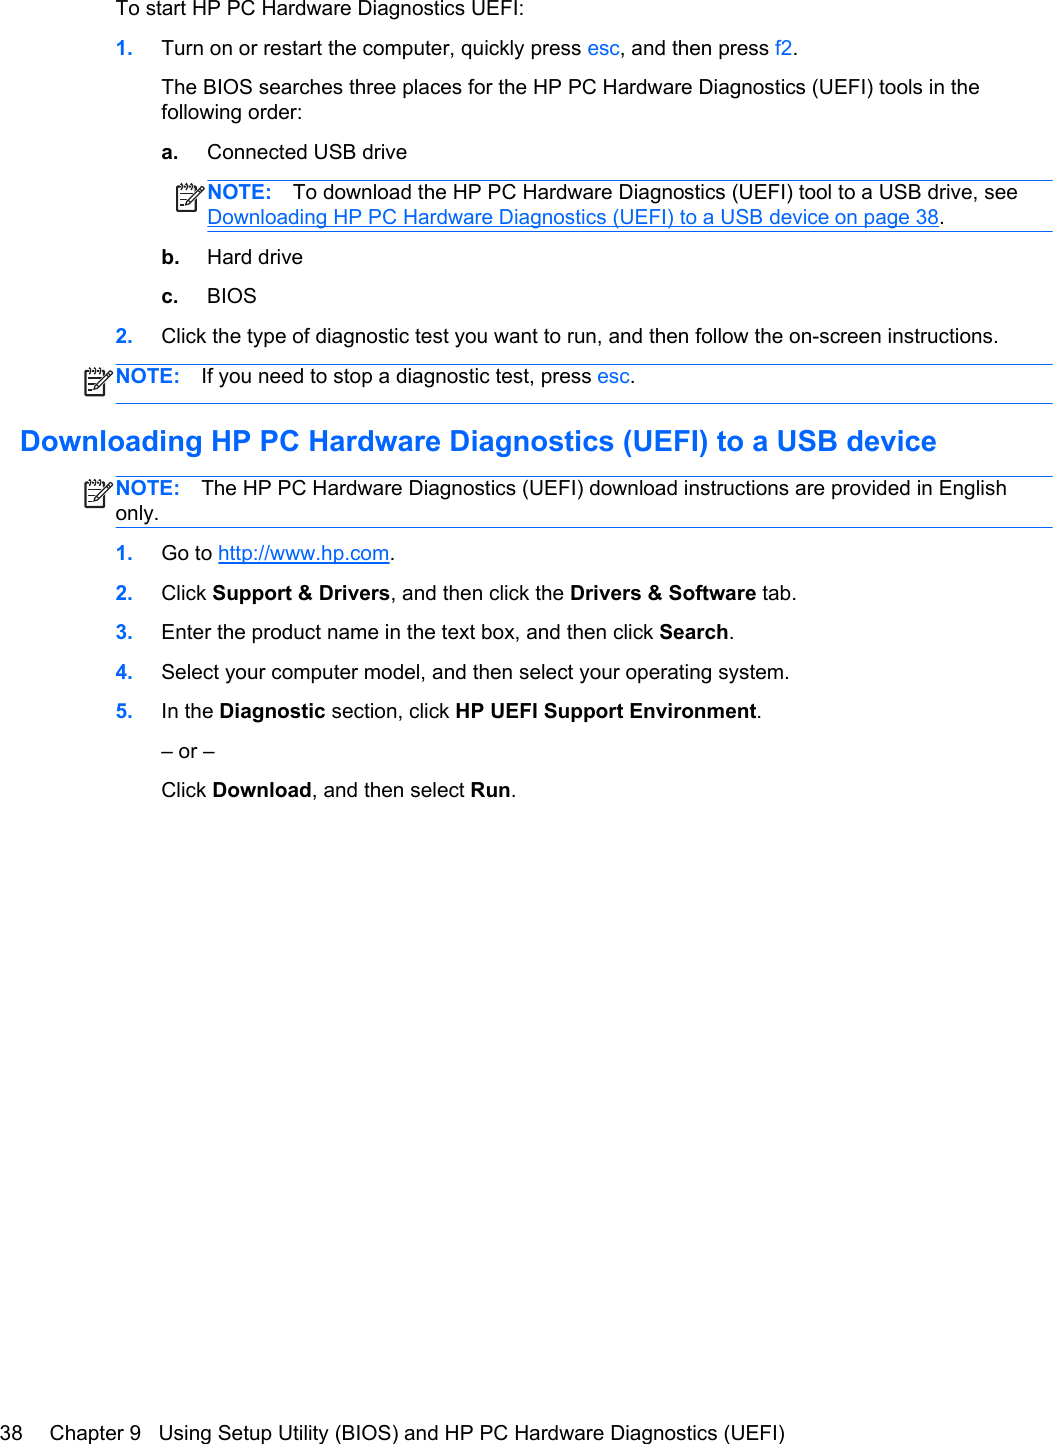 To start HP PC Hardware Diagnostics UEFI:1. Turn on or restart the computer, quickly press esc, and then press f2.The BIOS searches three places for the HP PC Hardware Diagnostics (UEFI) tools in thefollowing order:a. Connected USB driveNOTE: To download the HP PC Hardware Diagnostics (UEFI) tool to a USB drive, seeDownloading HP PC Hardware Diagnostics (UEFI) to a USB device on page 38.b. Hard drivec. BIOS2. Click the type of diagnostic test you want to run, and then follow the on-screen instructions.NOTE: If you need to stop a diagnostic test, press esc.Downloading HP PC Hardware Diagnostics (UEFI) to a USB deviceNOTE: The HP PC Hardware Diagnostics (UEFI) download instructions are provided in Englishonly.1. Go to http://www.hp.com.2. Click Support &amp; Drivers, and then click the Drivers &amp; Software tab.3. Enter the product name in the text box, and then click Search.4. Select your computer model, and then select your operating system.5. In the Diagnostic section, click HP UEFI Support Environment.– or –Click Download, and then select Run.38 Chapter 9   Using Setup Utility (BIOS) and HP PC Hardware Diagnostics (UEFI)